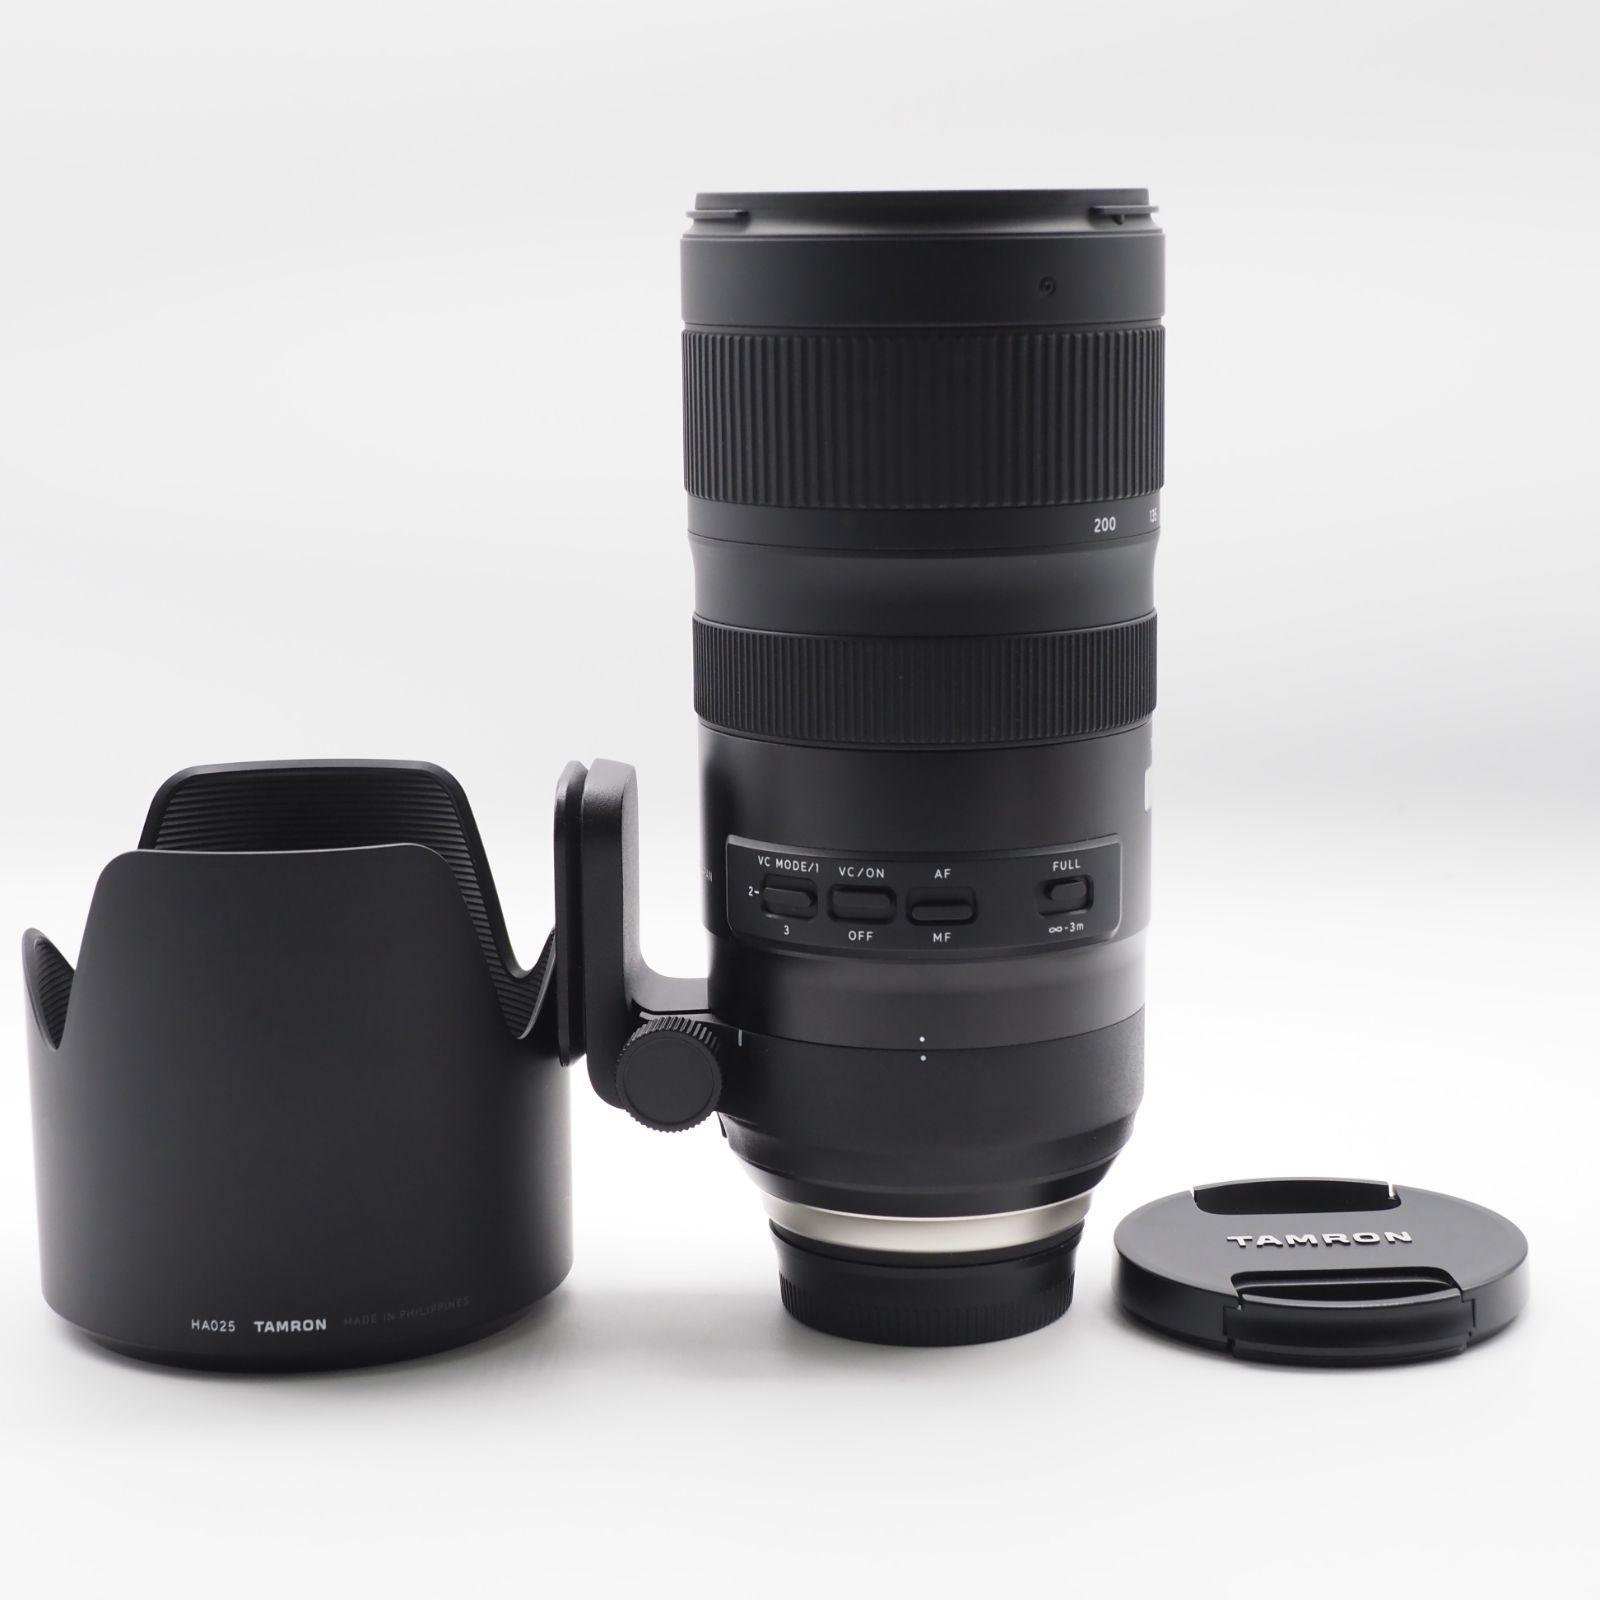 TAMRON 大口径望遠ズームレンズ SP 70-200mm F2.8 Di VC USD G2 ニコン